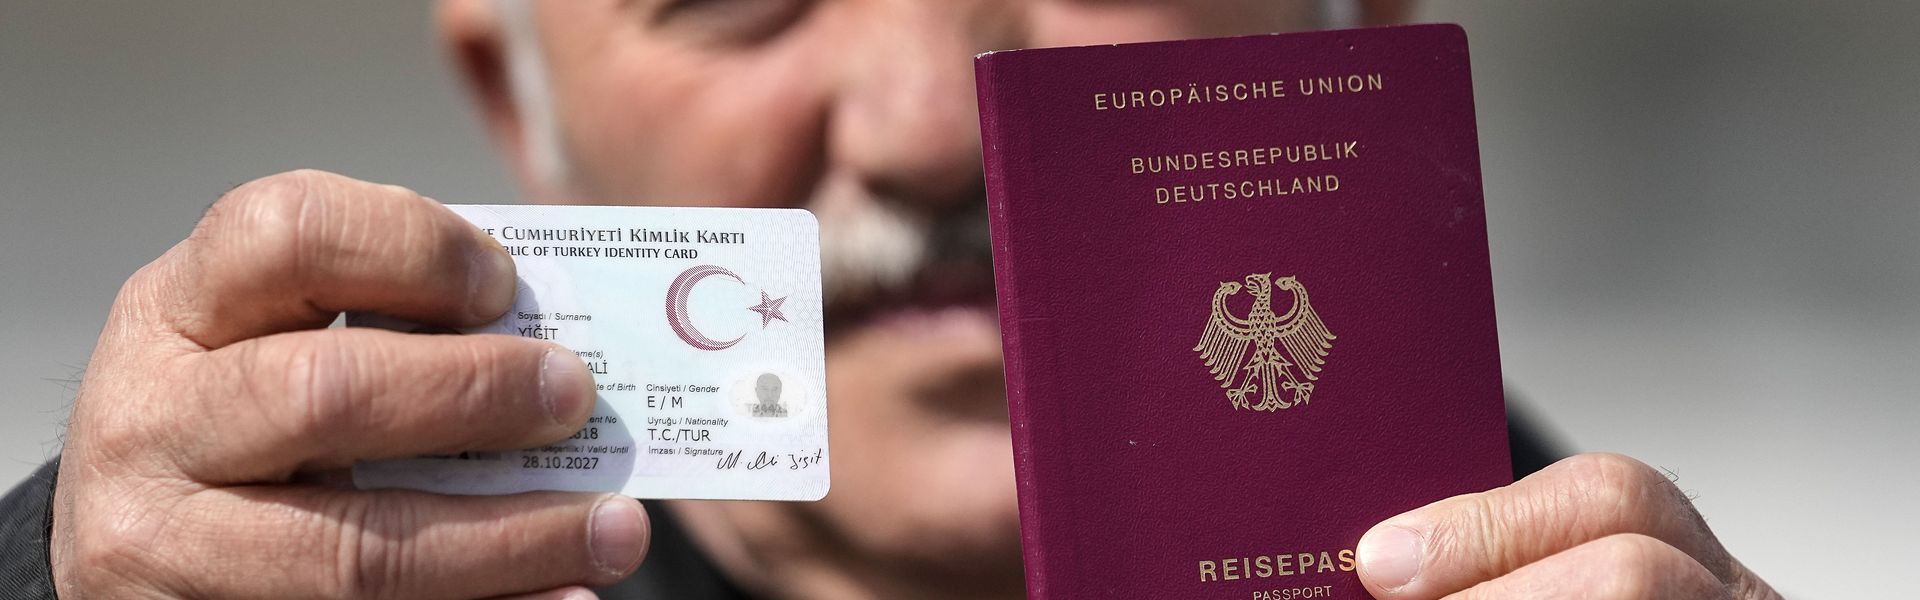 Mehmet Ali Yigit, who has been living in Germany for more than 50 years, shows his German passport and Turkish ID after he voted at the Gruga Hall in Essen, Germany.